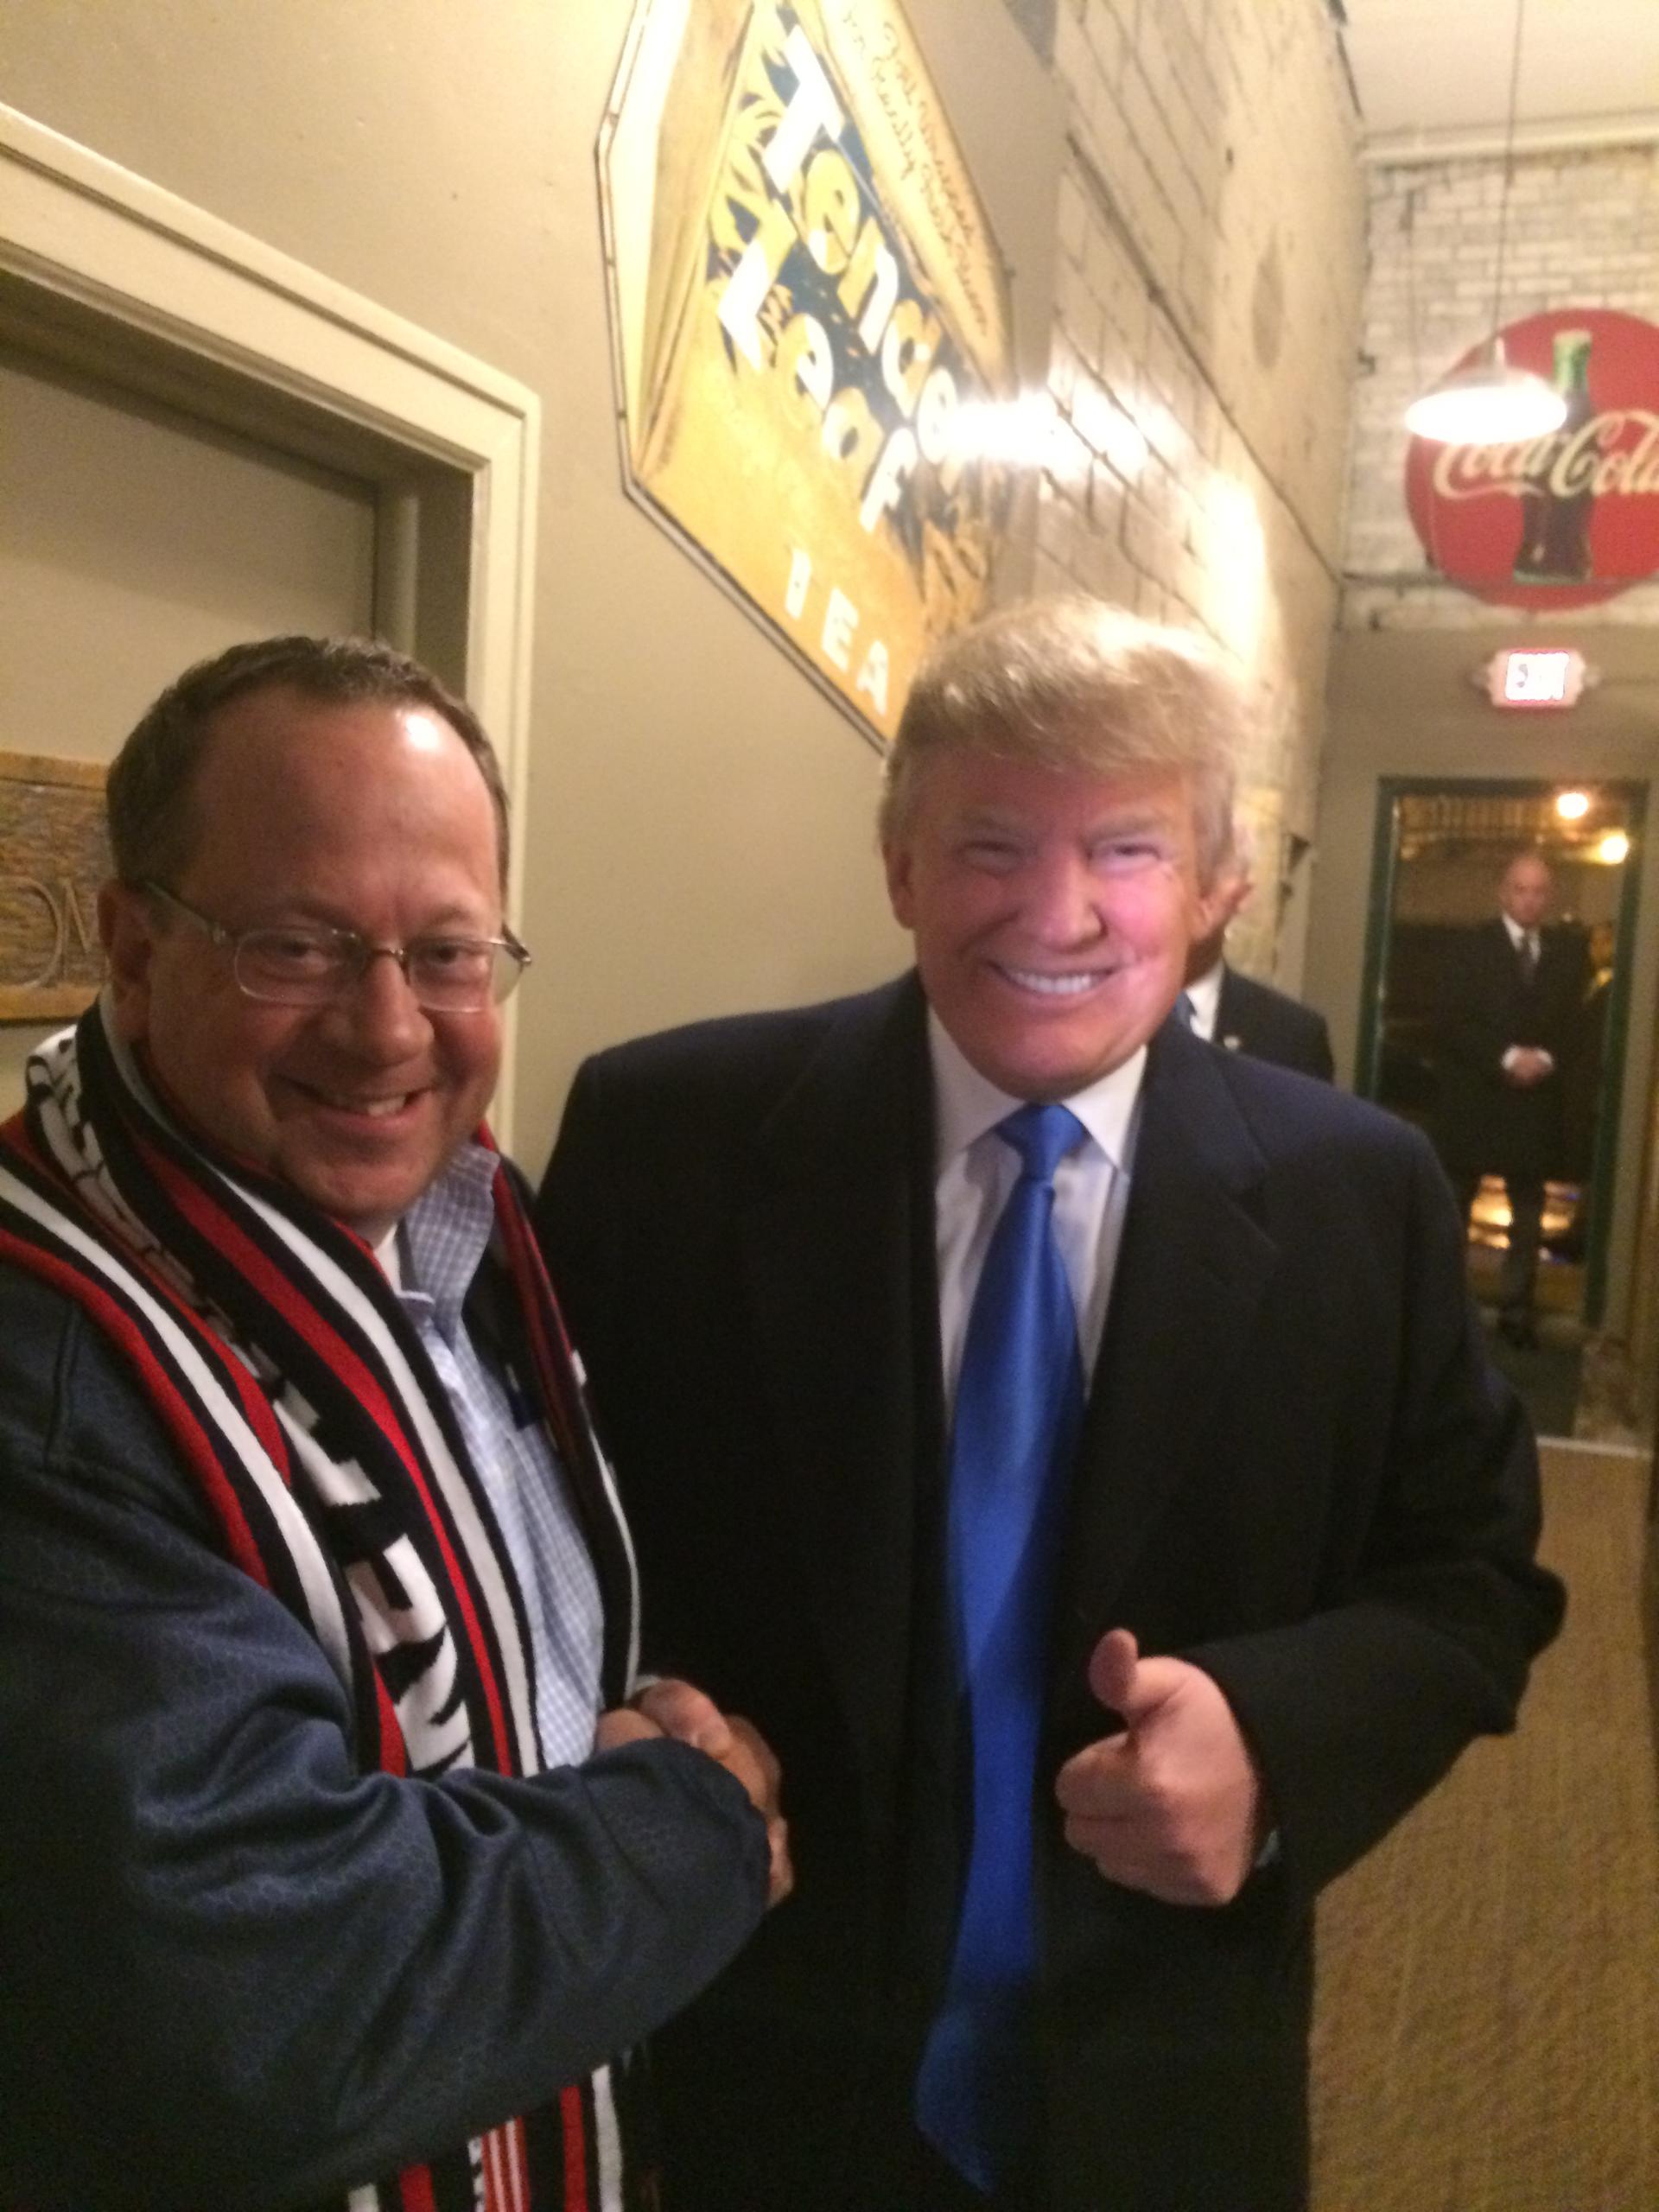 Dave McNeer meeting with then presidential candidate Donald Trump in Iowa in 2016.